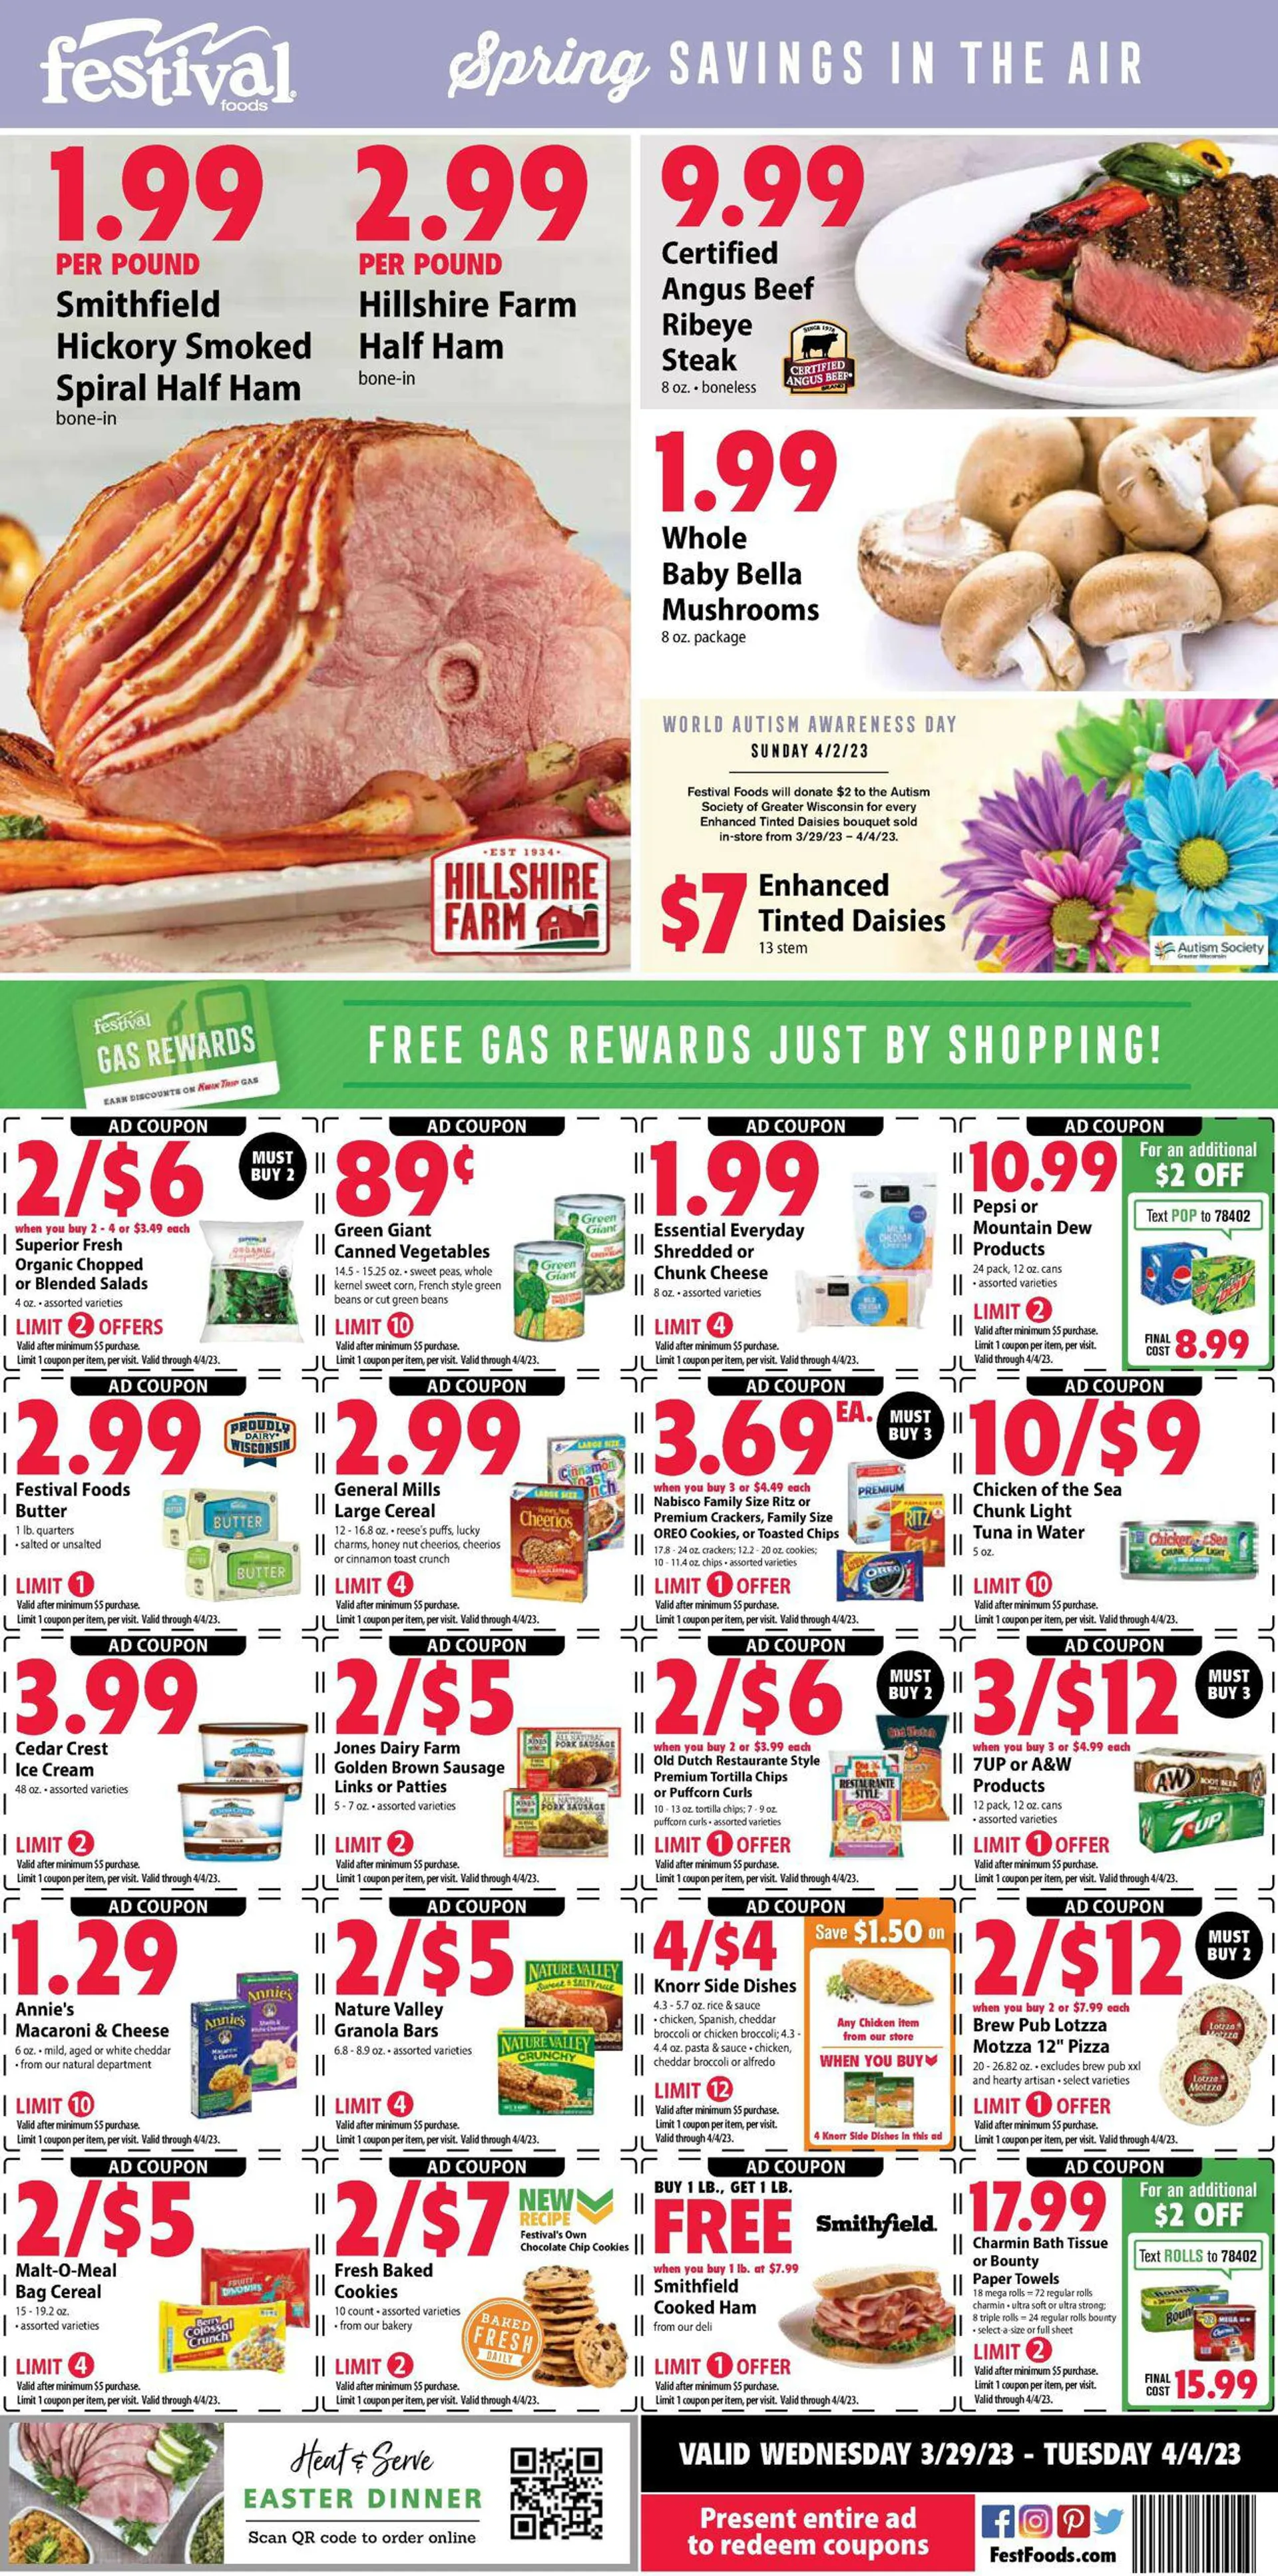 Festival Foods Current weekly ad - 1